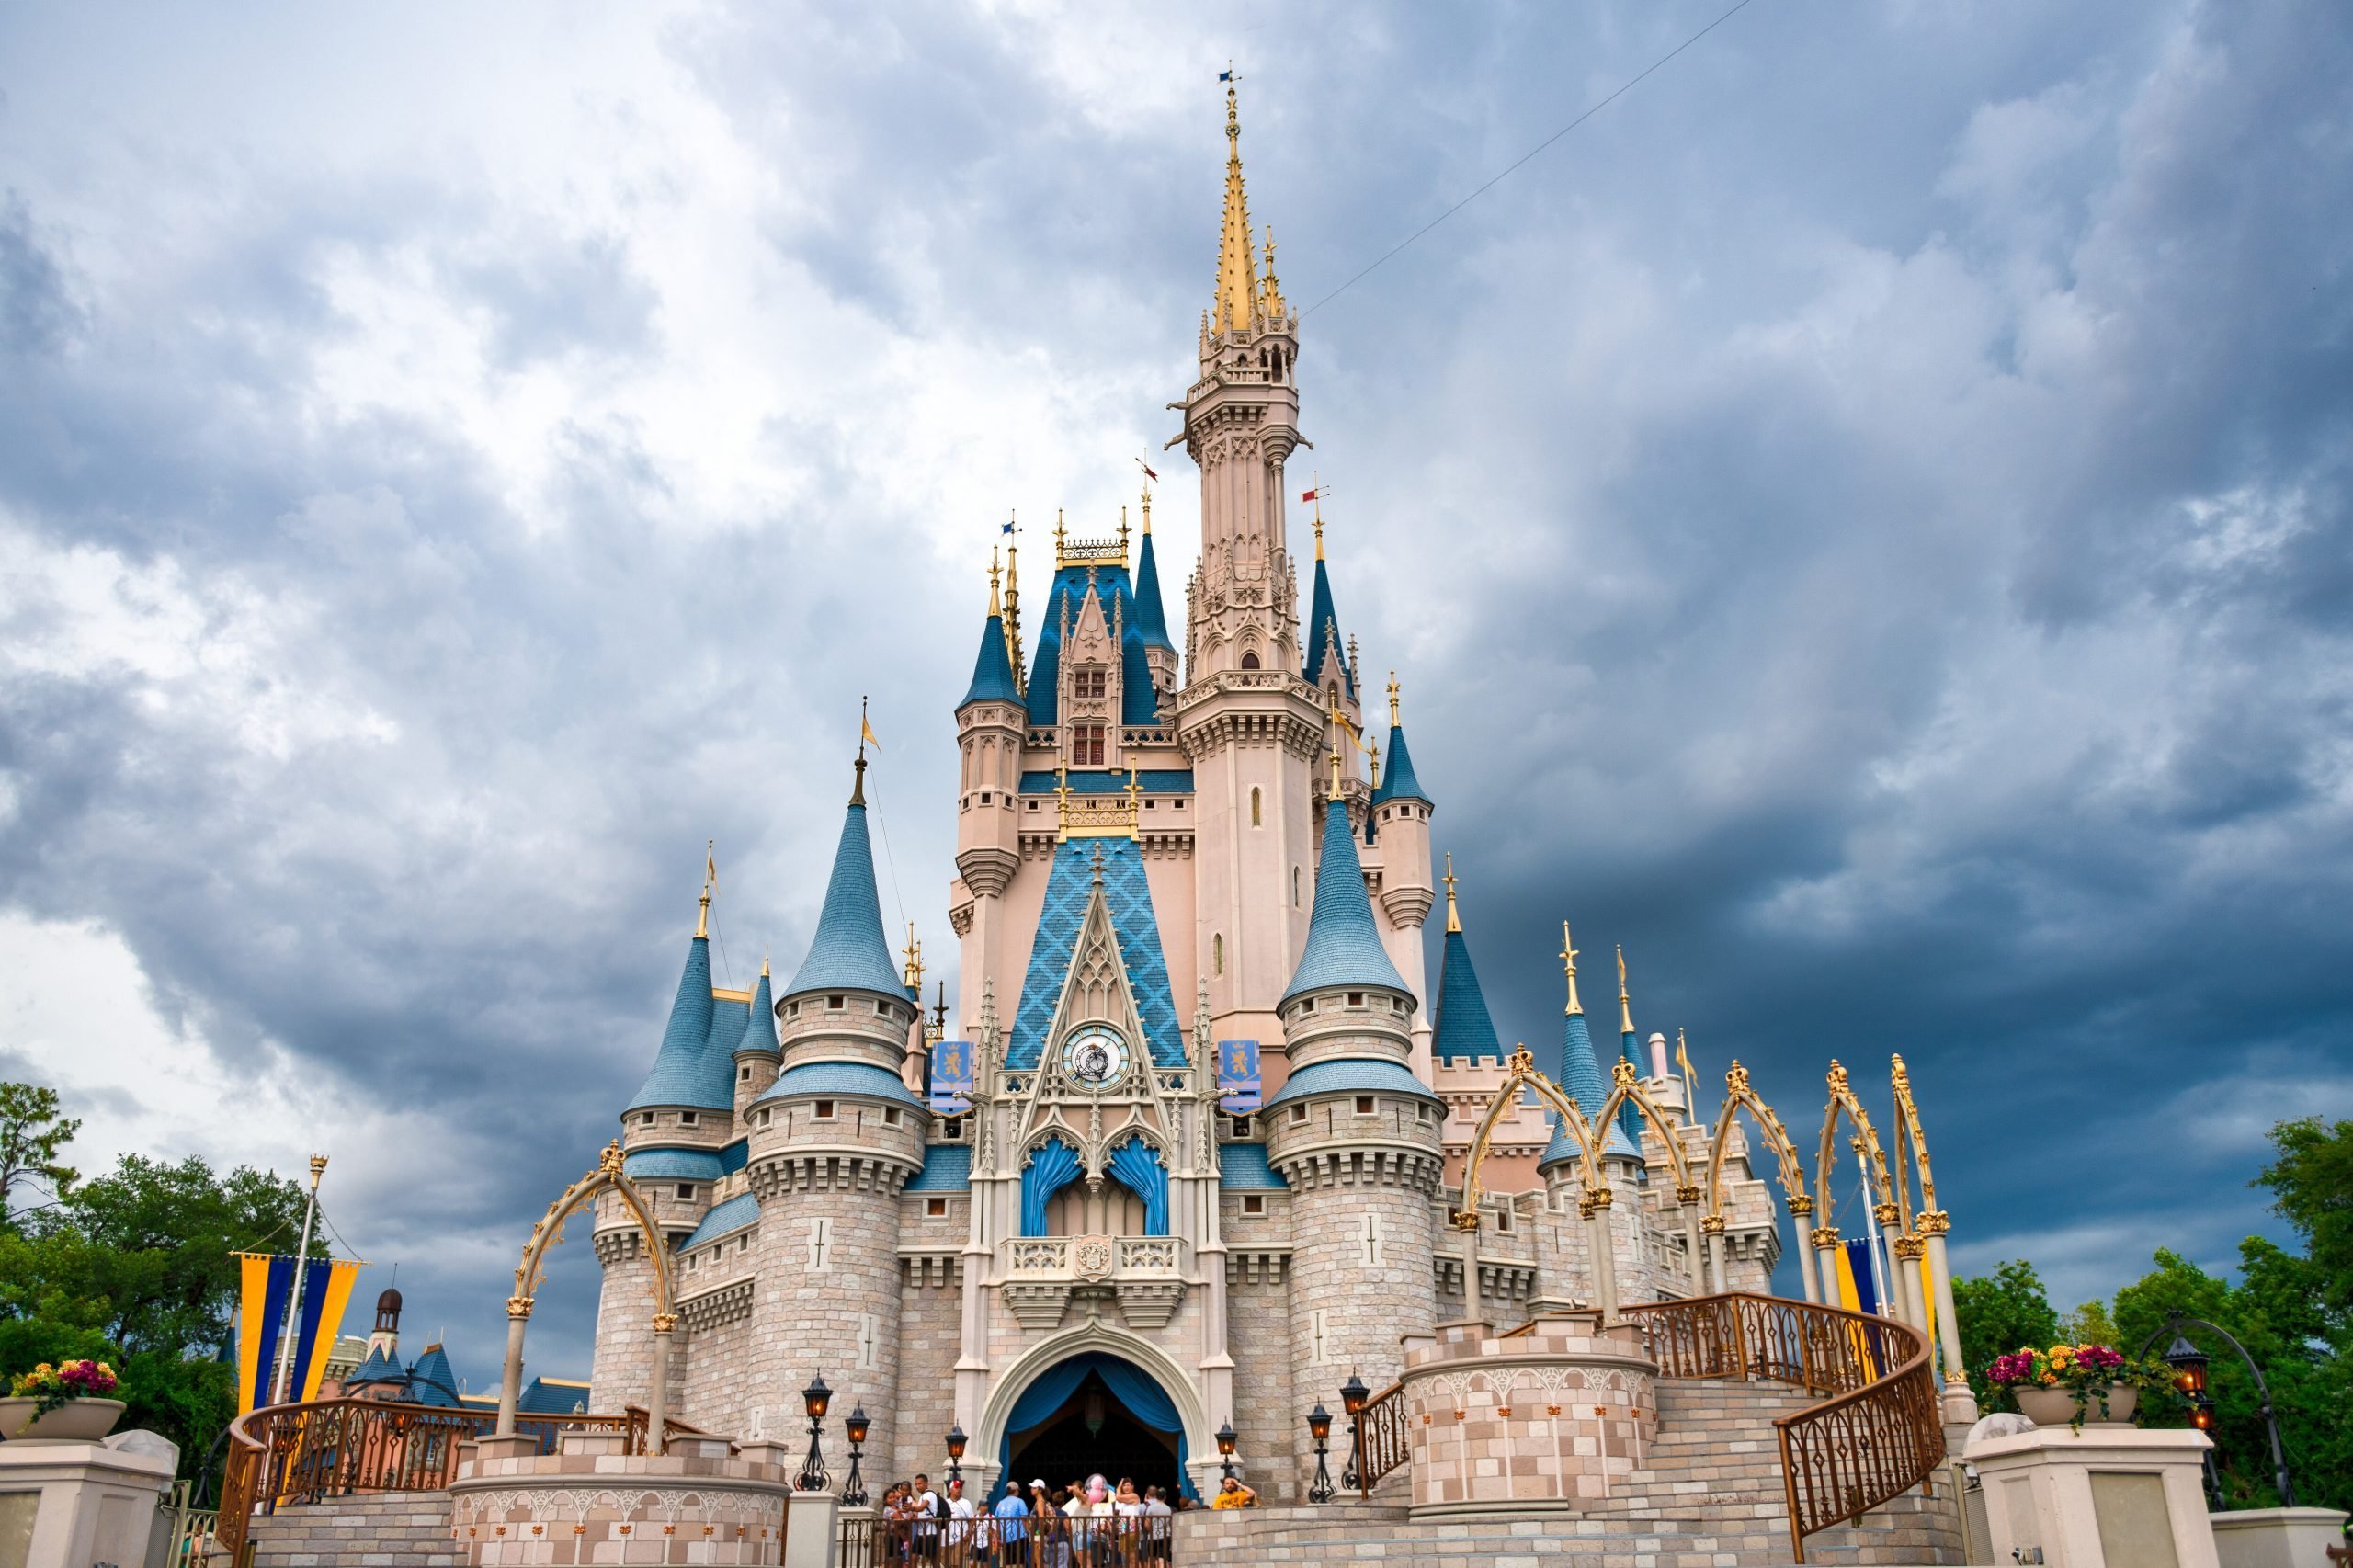 During your visits to Disney World, have you ever encountered any